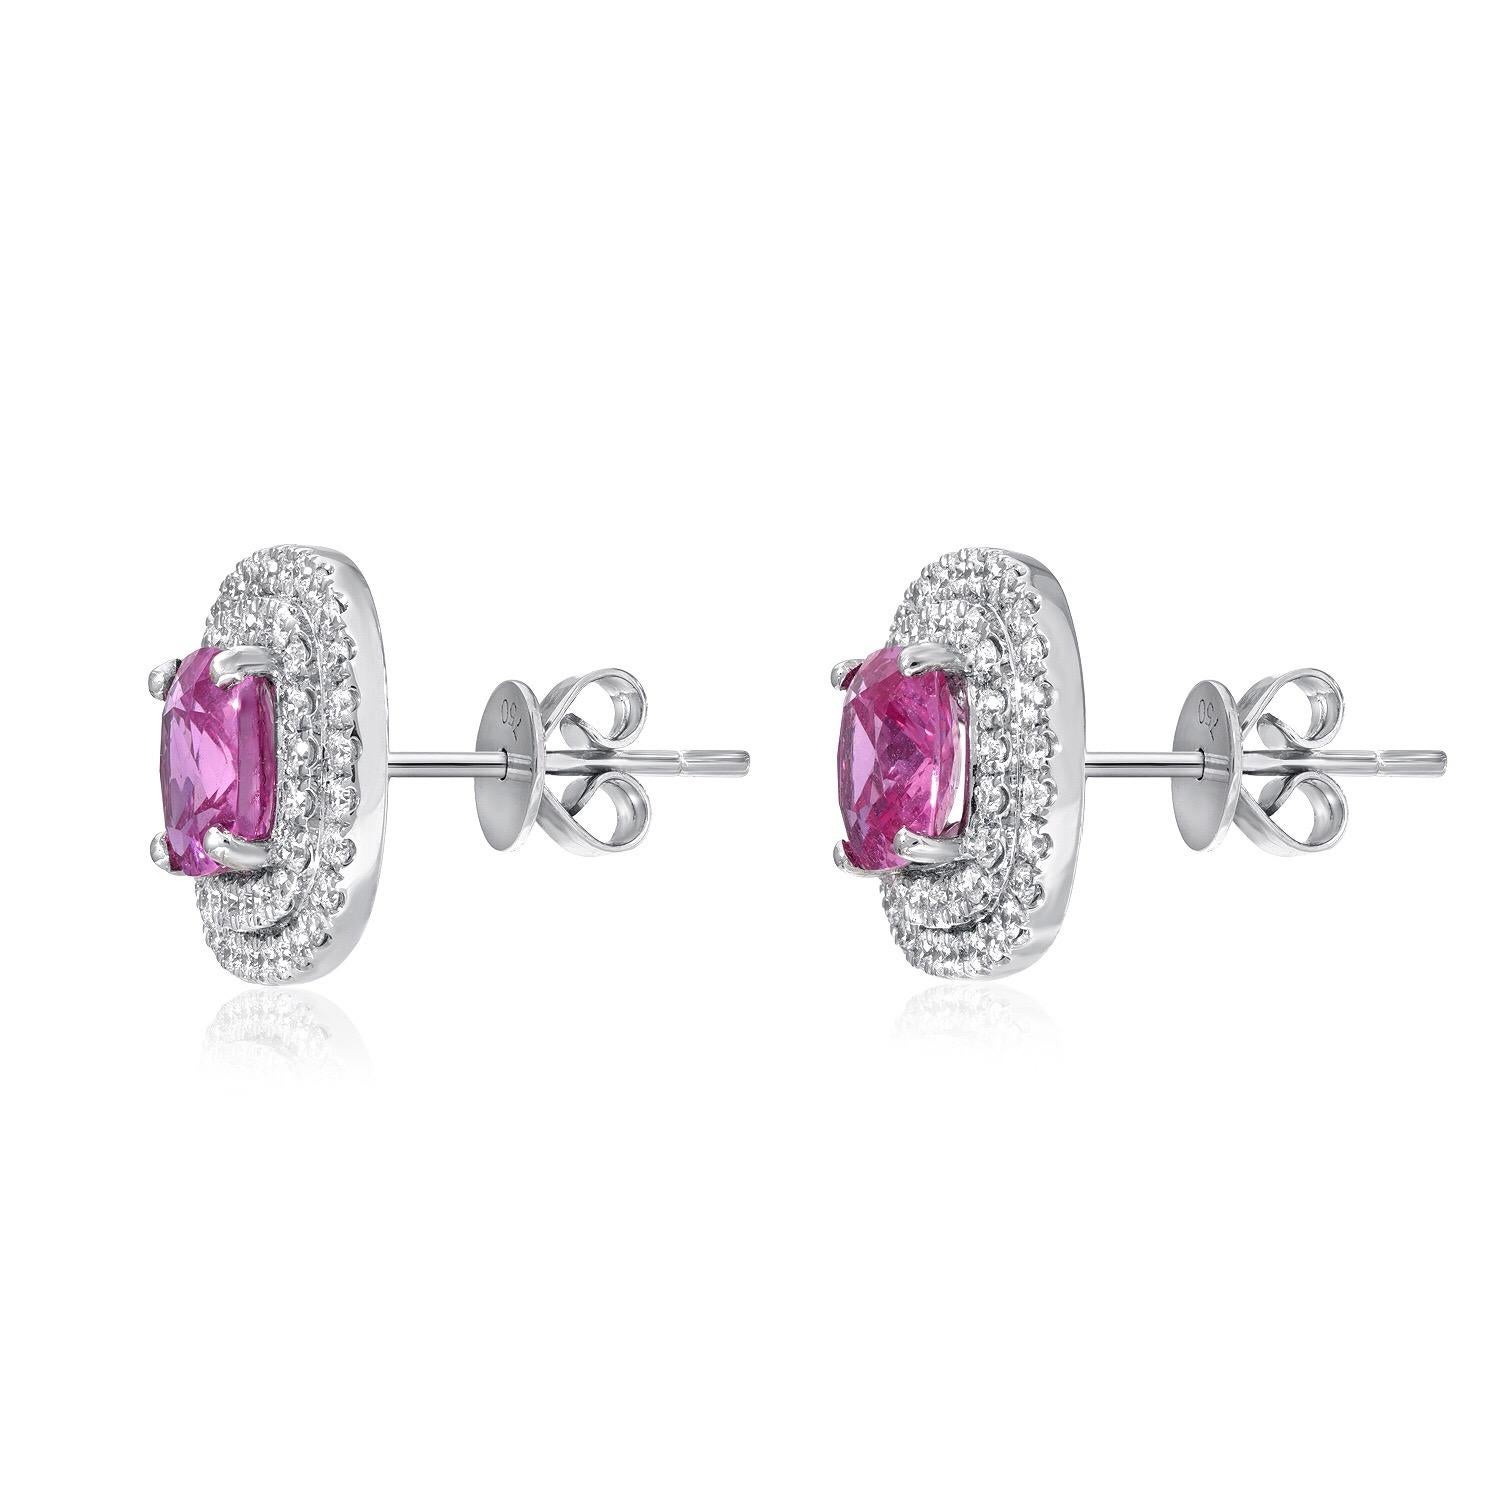 Pink Sapphire diamond stud earrings featuring a pair of cushion cut Pink Sapphire weighing a total of 3.31 carats, surrounded by a total of 0.91 carats of micro pave set diamonds, in 18K white gold.
Approximately 0.50 inches wide.
Returns are